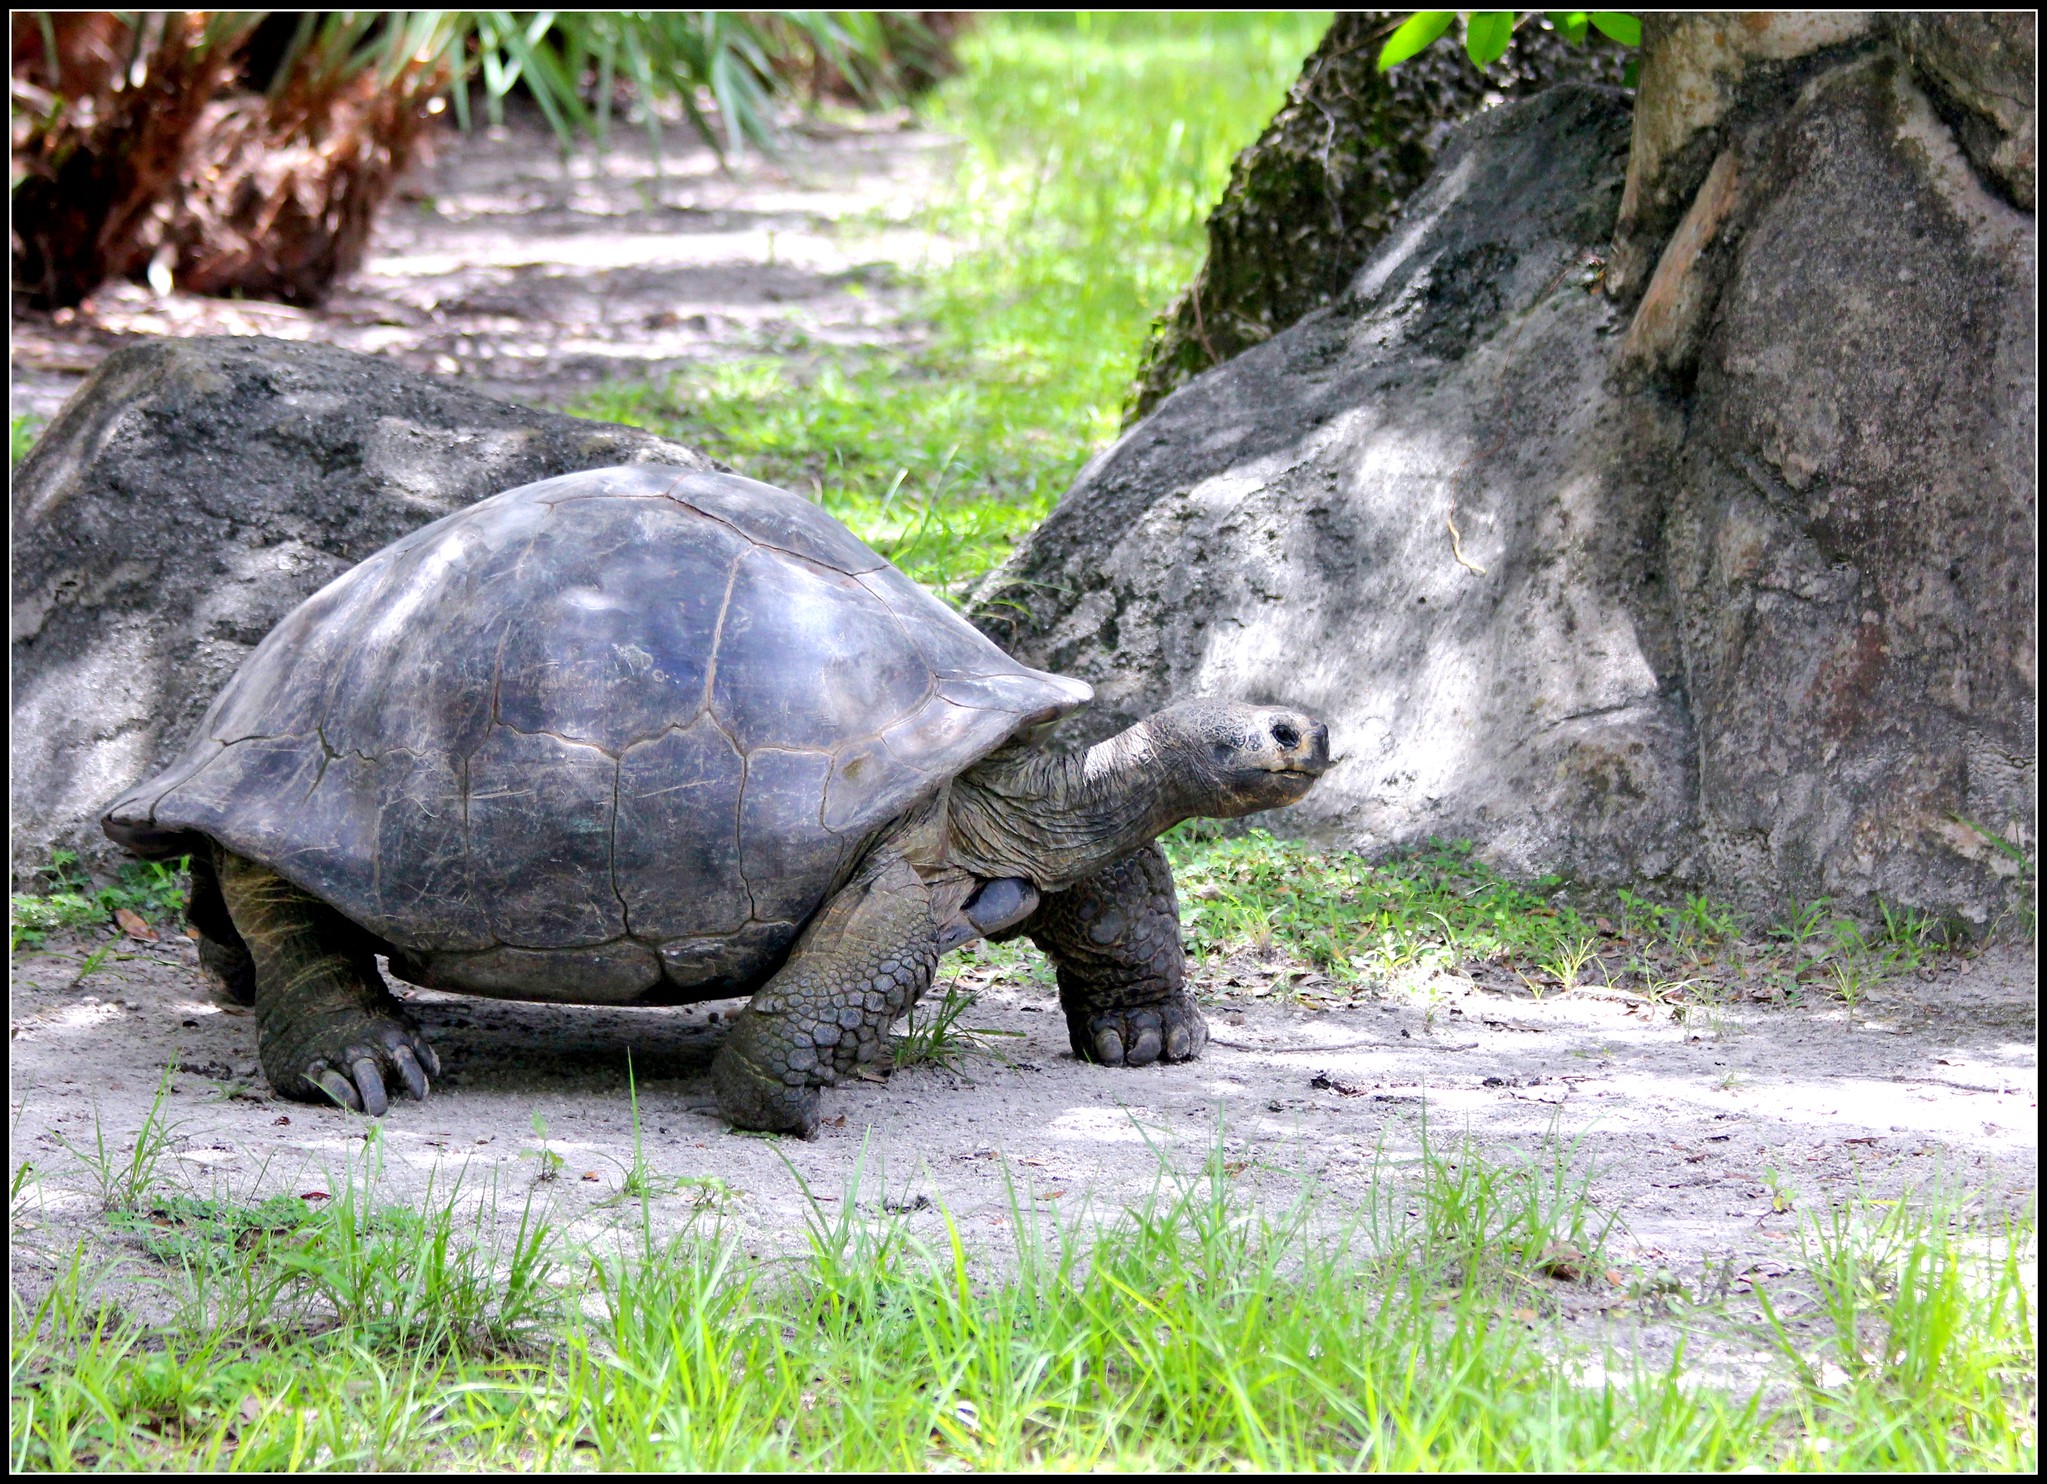 a very large tortoise walking on the ground under a tree